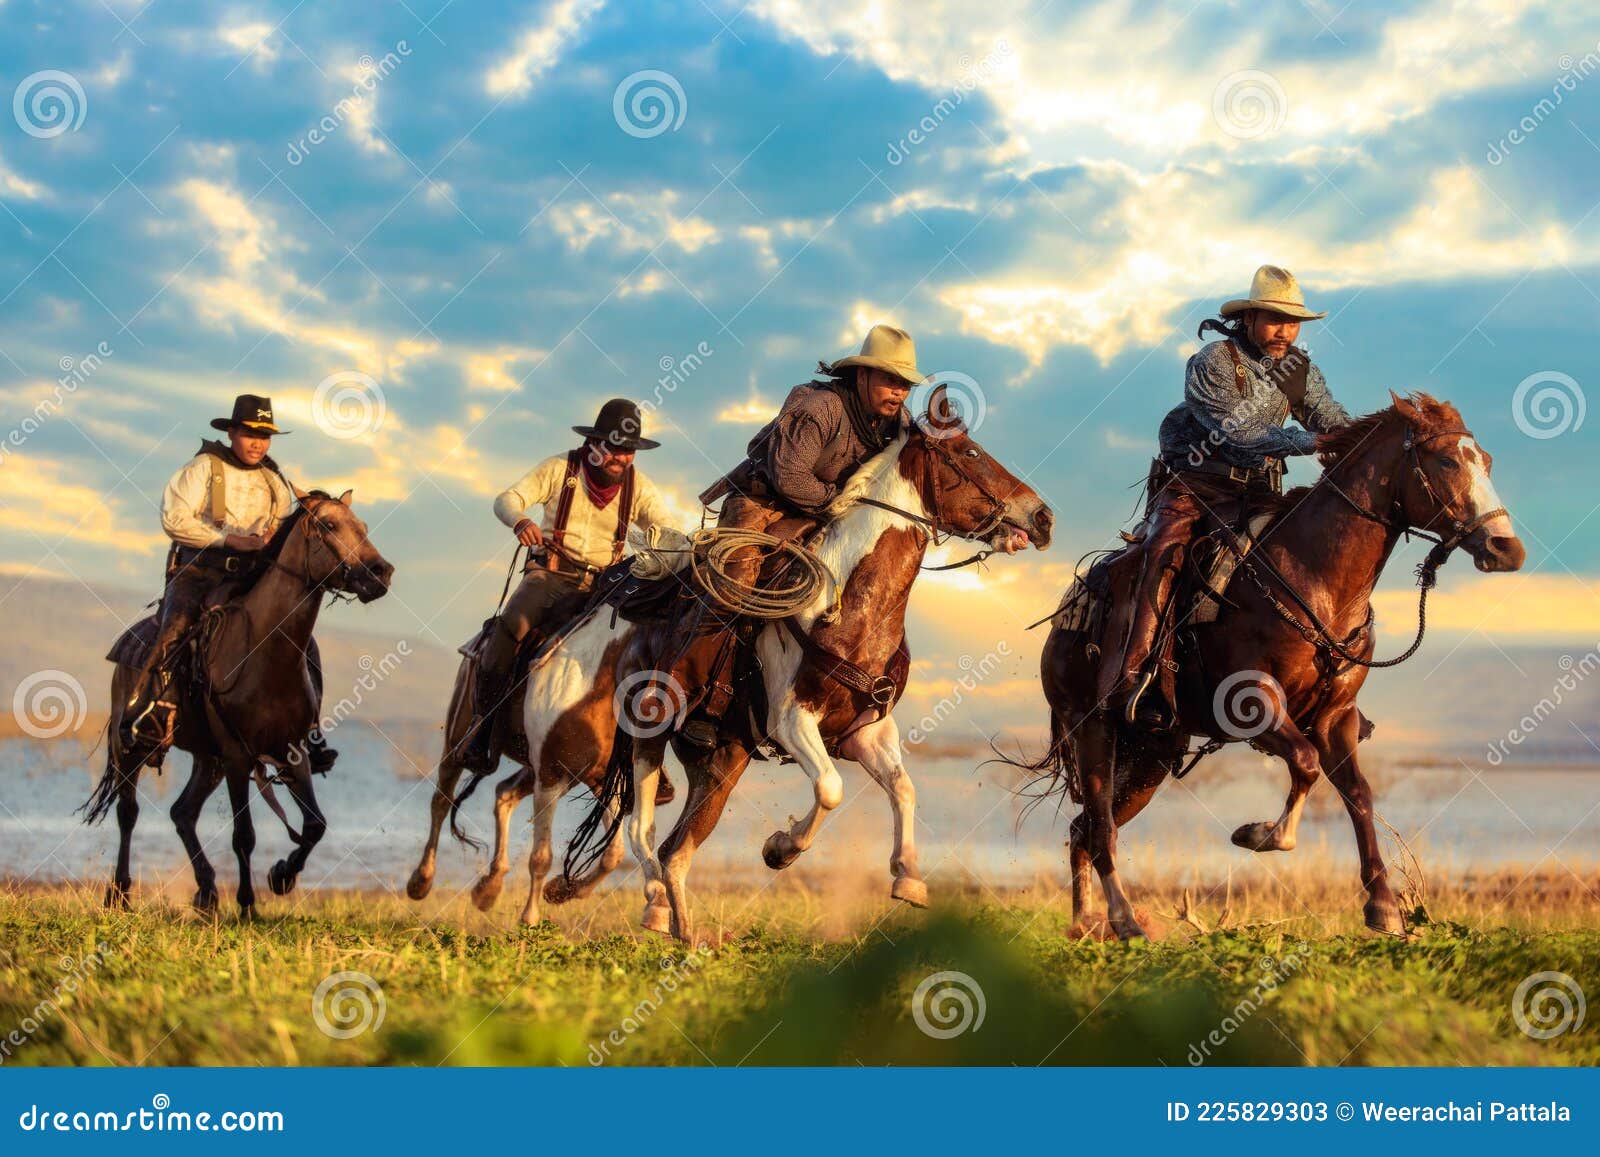 a group of cowboys riding horses.